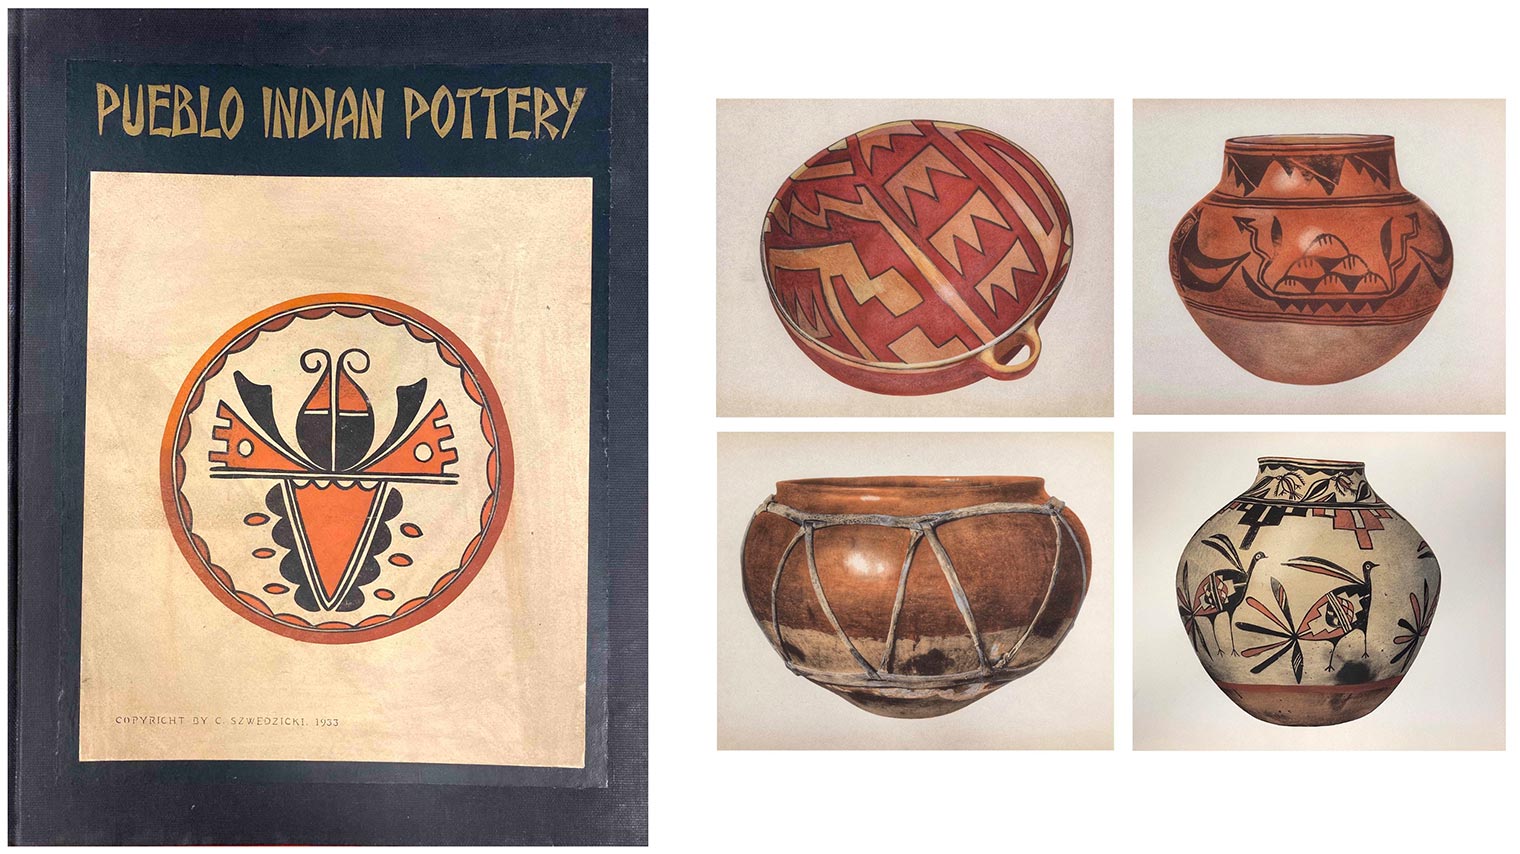 Book cover and 4 Native American pots